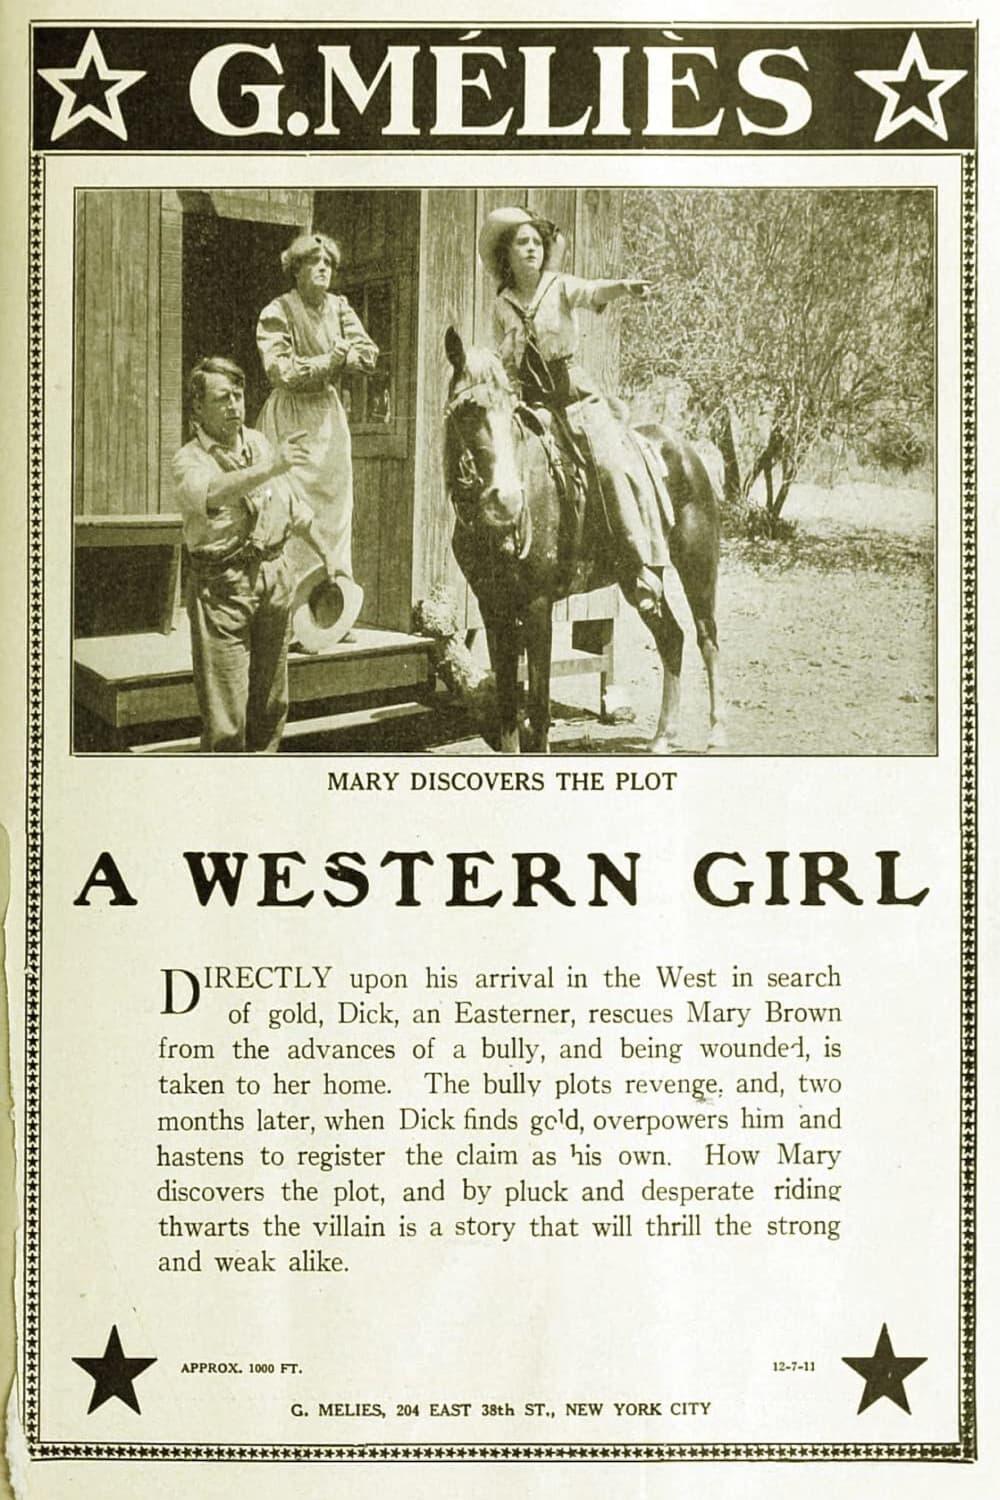 A Western Girl poster